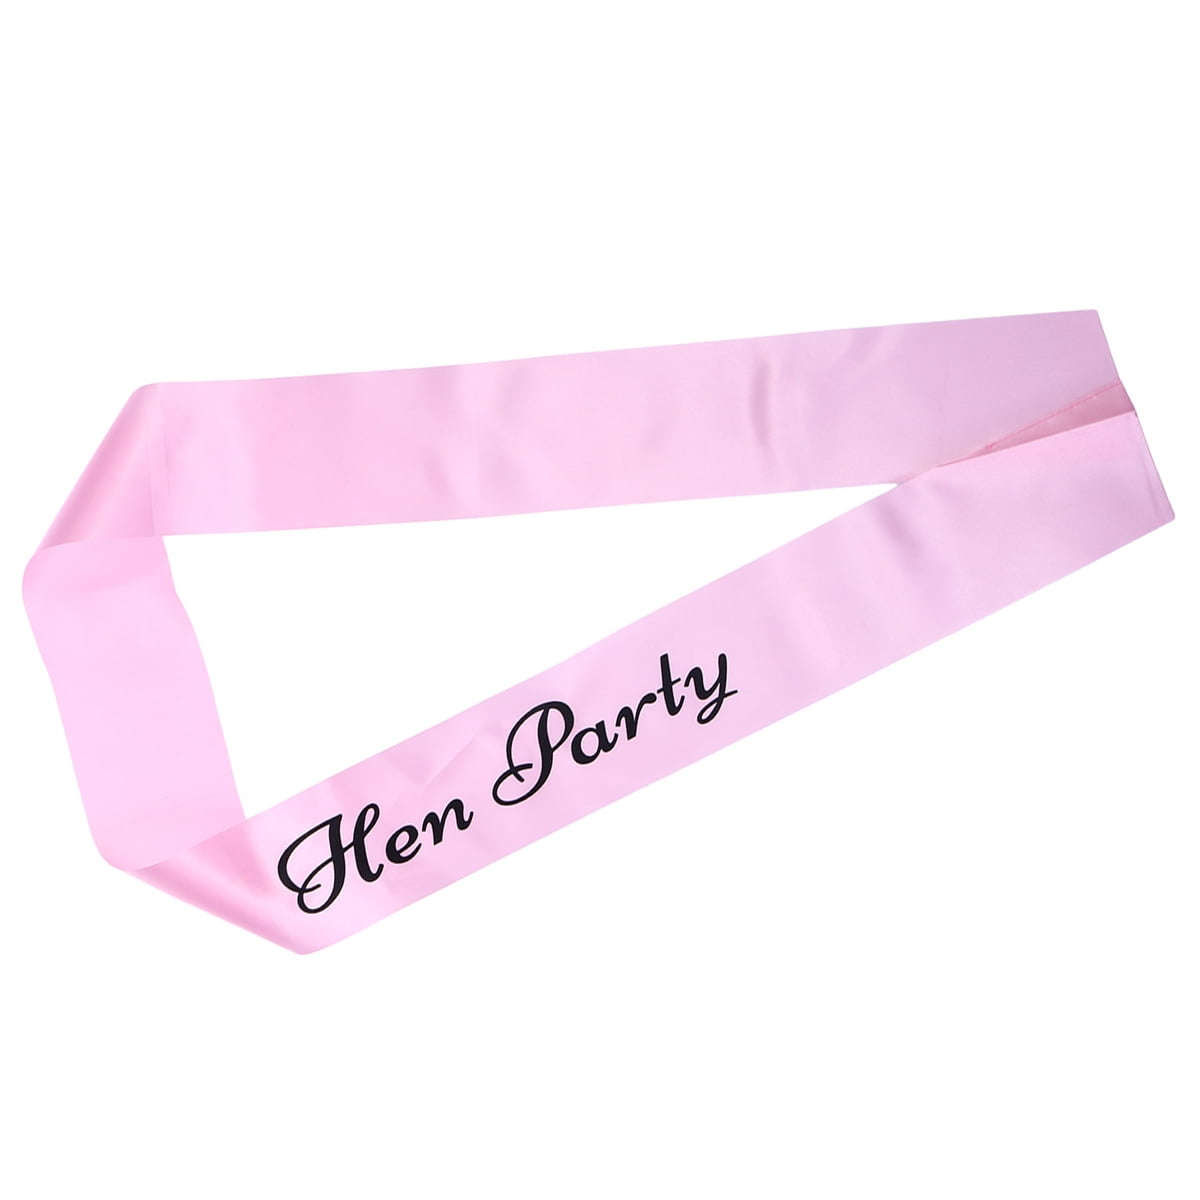 Details about   9 Hen Party Sash Pink Girls Do Night Out Party Wedding Bride To Be Accessories 